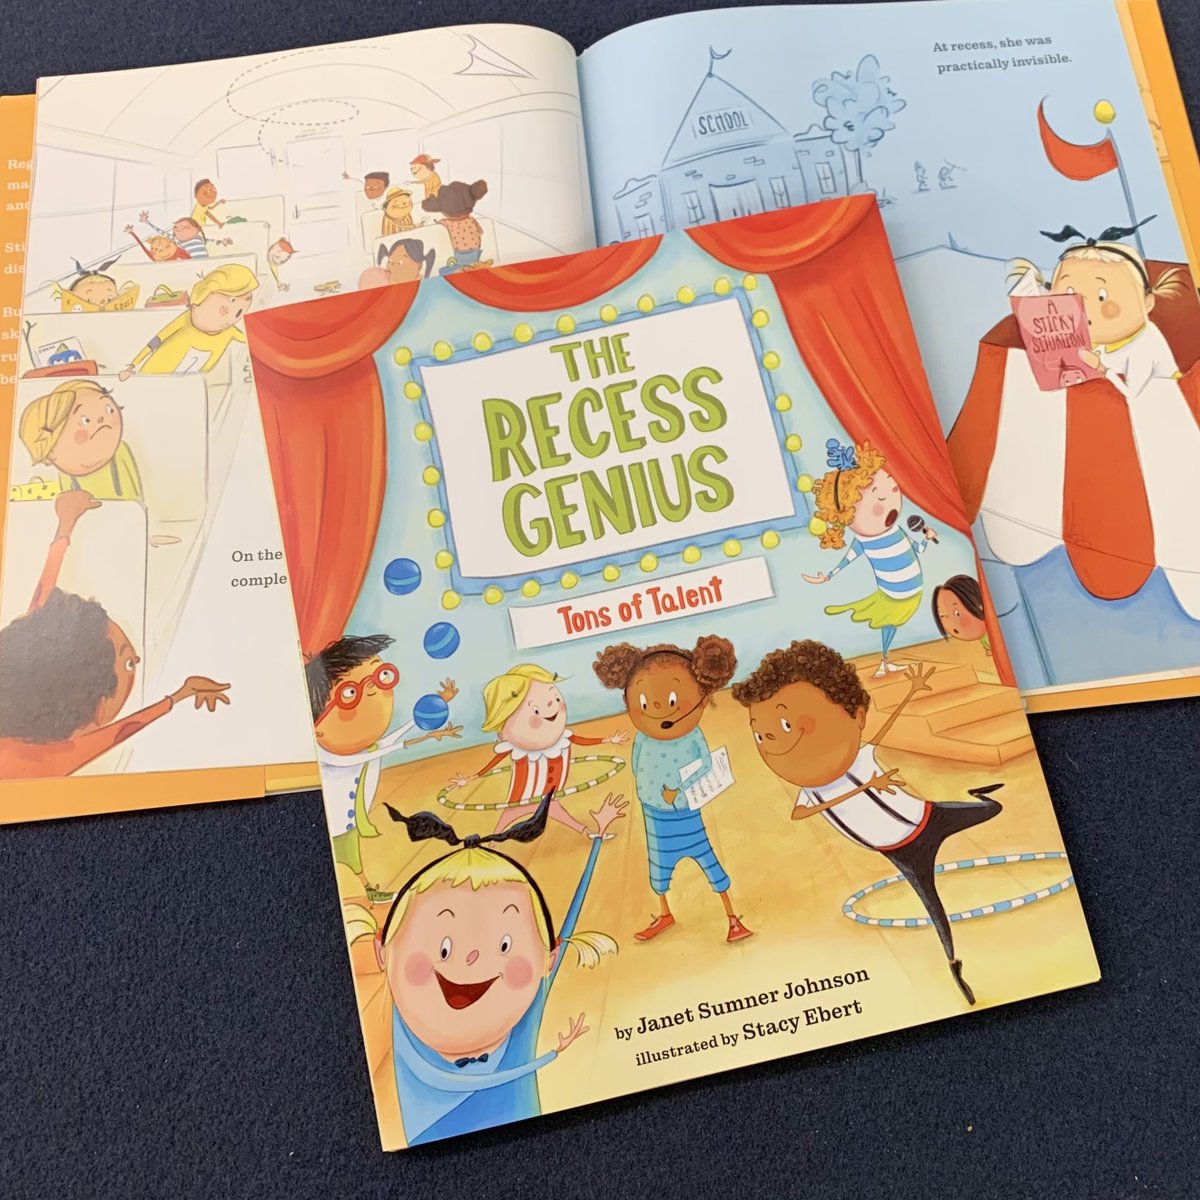 Happy book birthday to THE RECESS GENIUS: TONS OF TALENT! The playground problem-solver returns to shelves in this new #picturebook today! @MsVerbose @StacyEbert ow.ly/7PS850RxG7K #bookbirthday